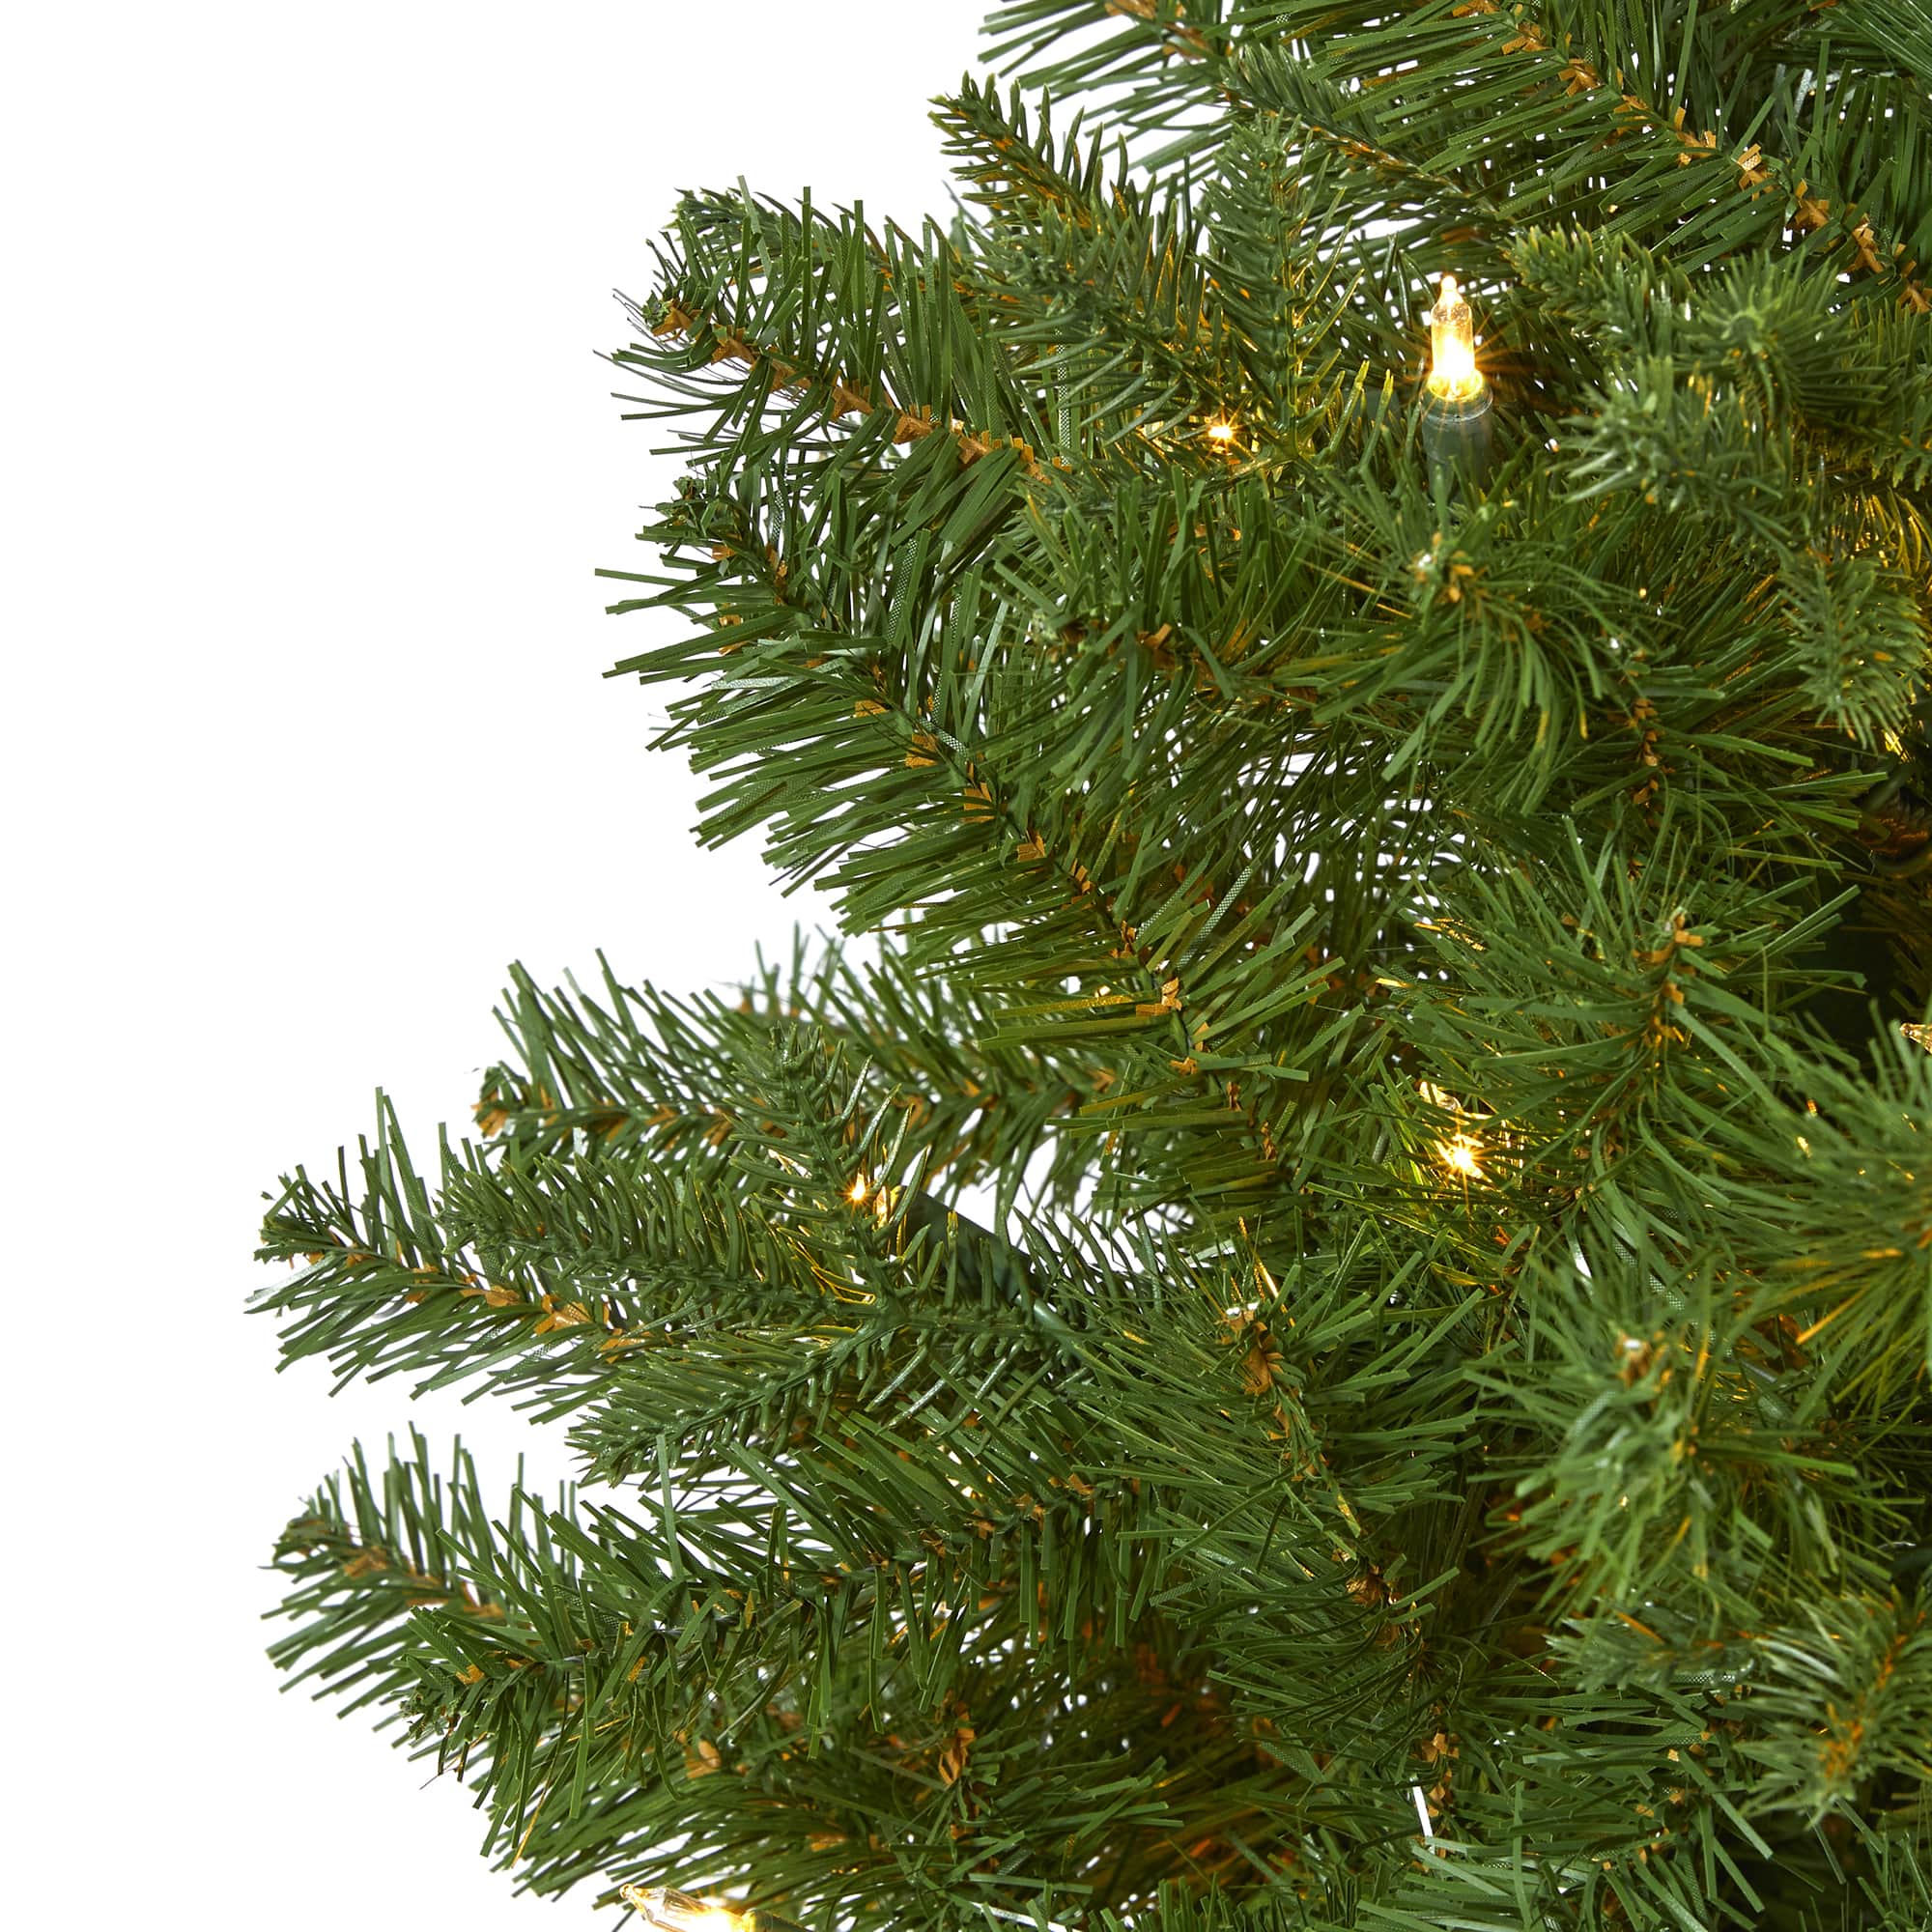 5ft. Pre-Lit Vancouver Spruce Artificial Christmas Tree, Warm White LED Lights